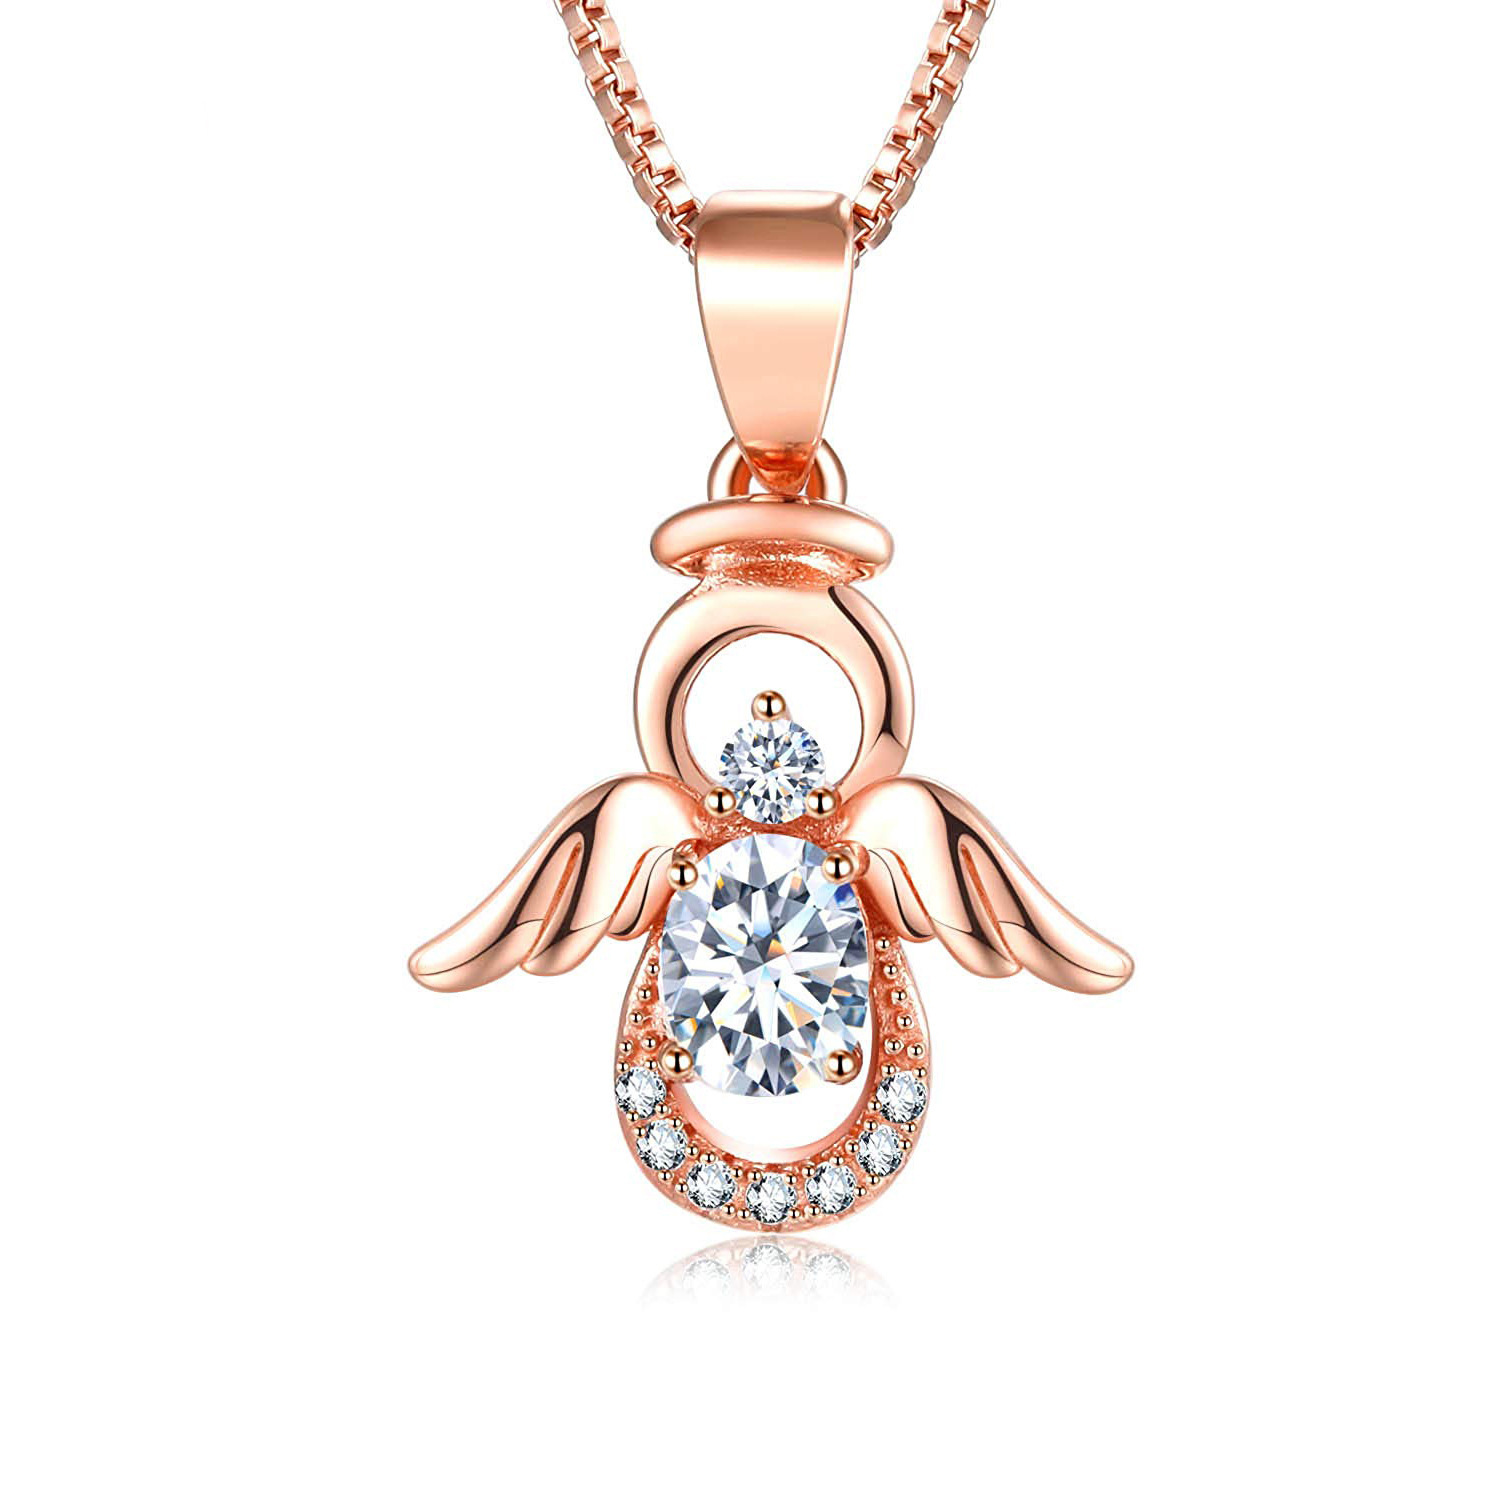 Lovely Rose Gold Angel Pendant with Twinkling Cubic Zirconia